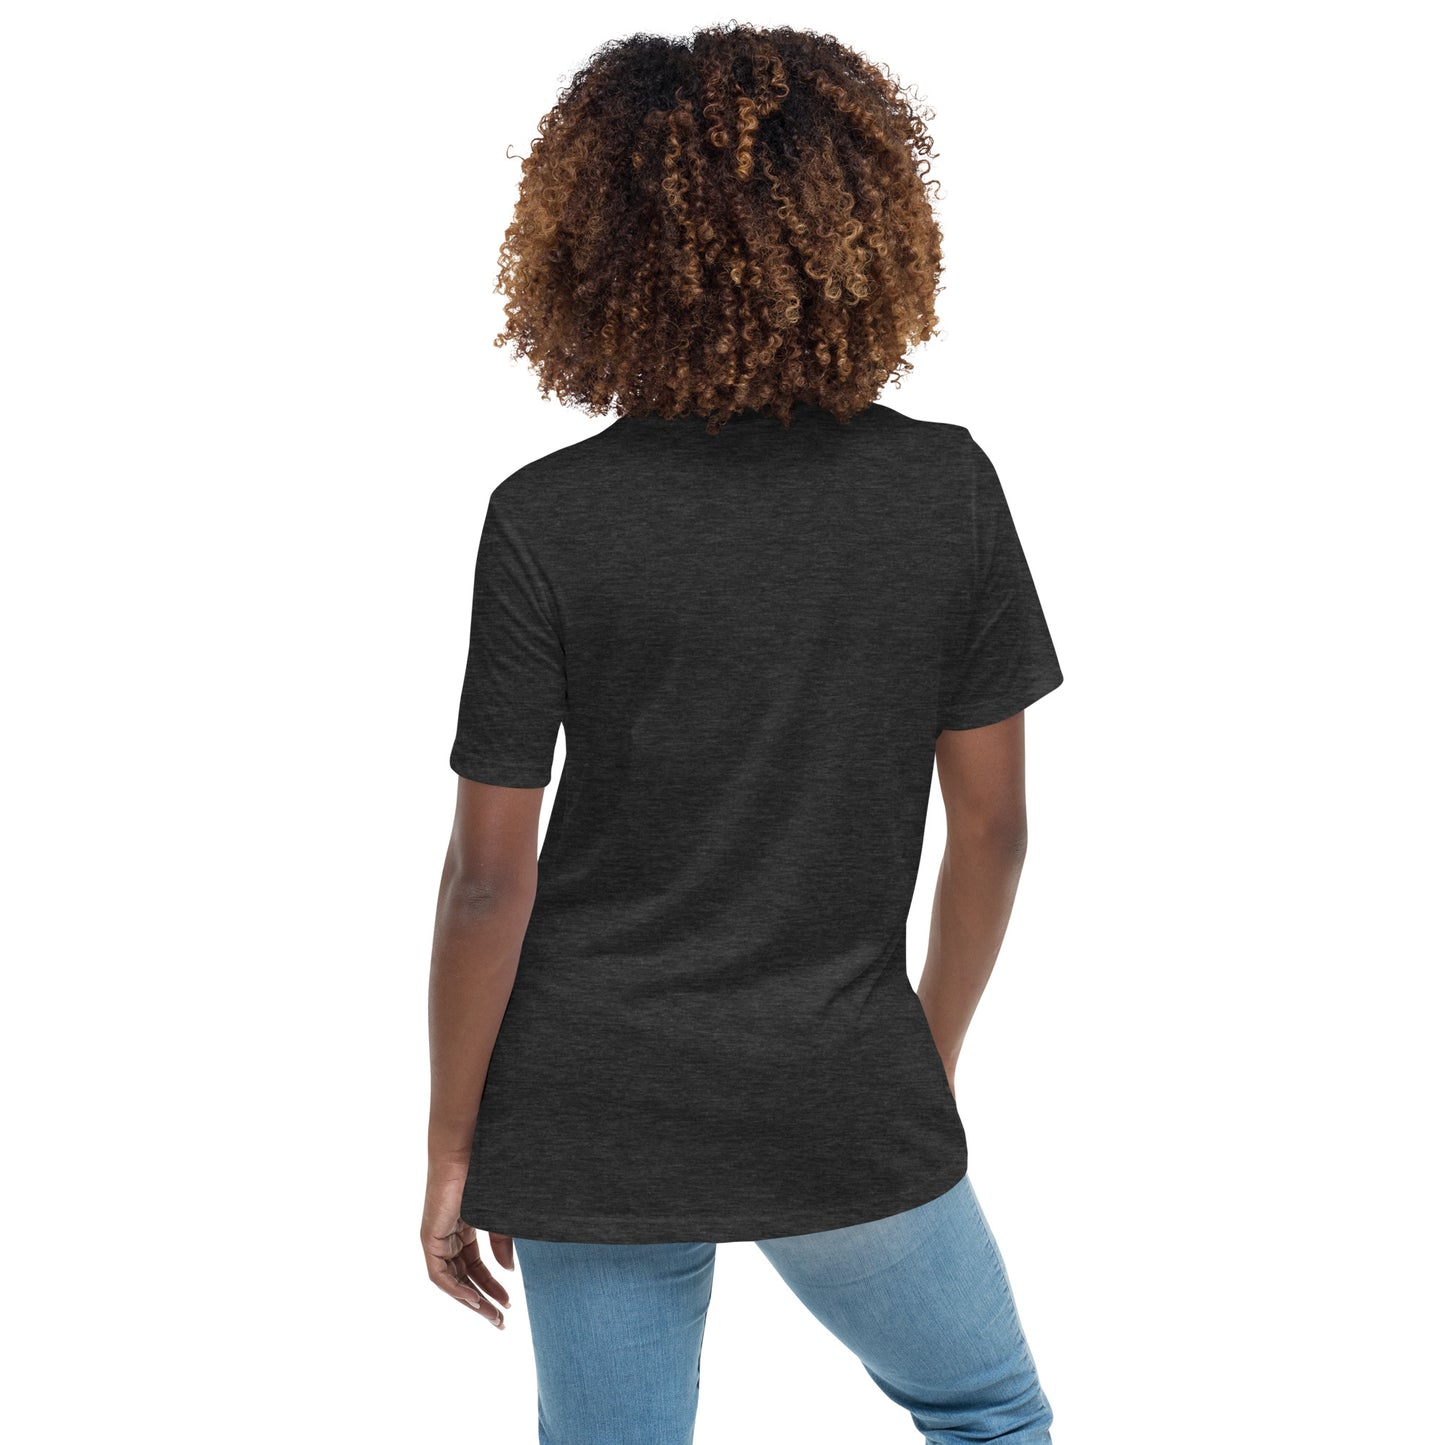 Women's T-Shirt Relaxed: Peace Love Joy (more colors)